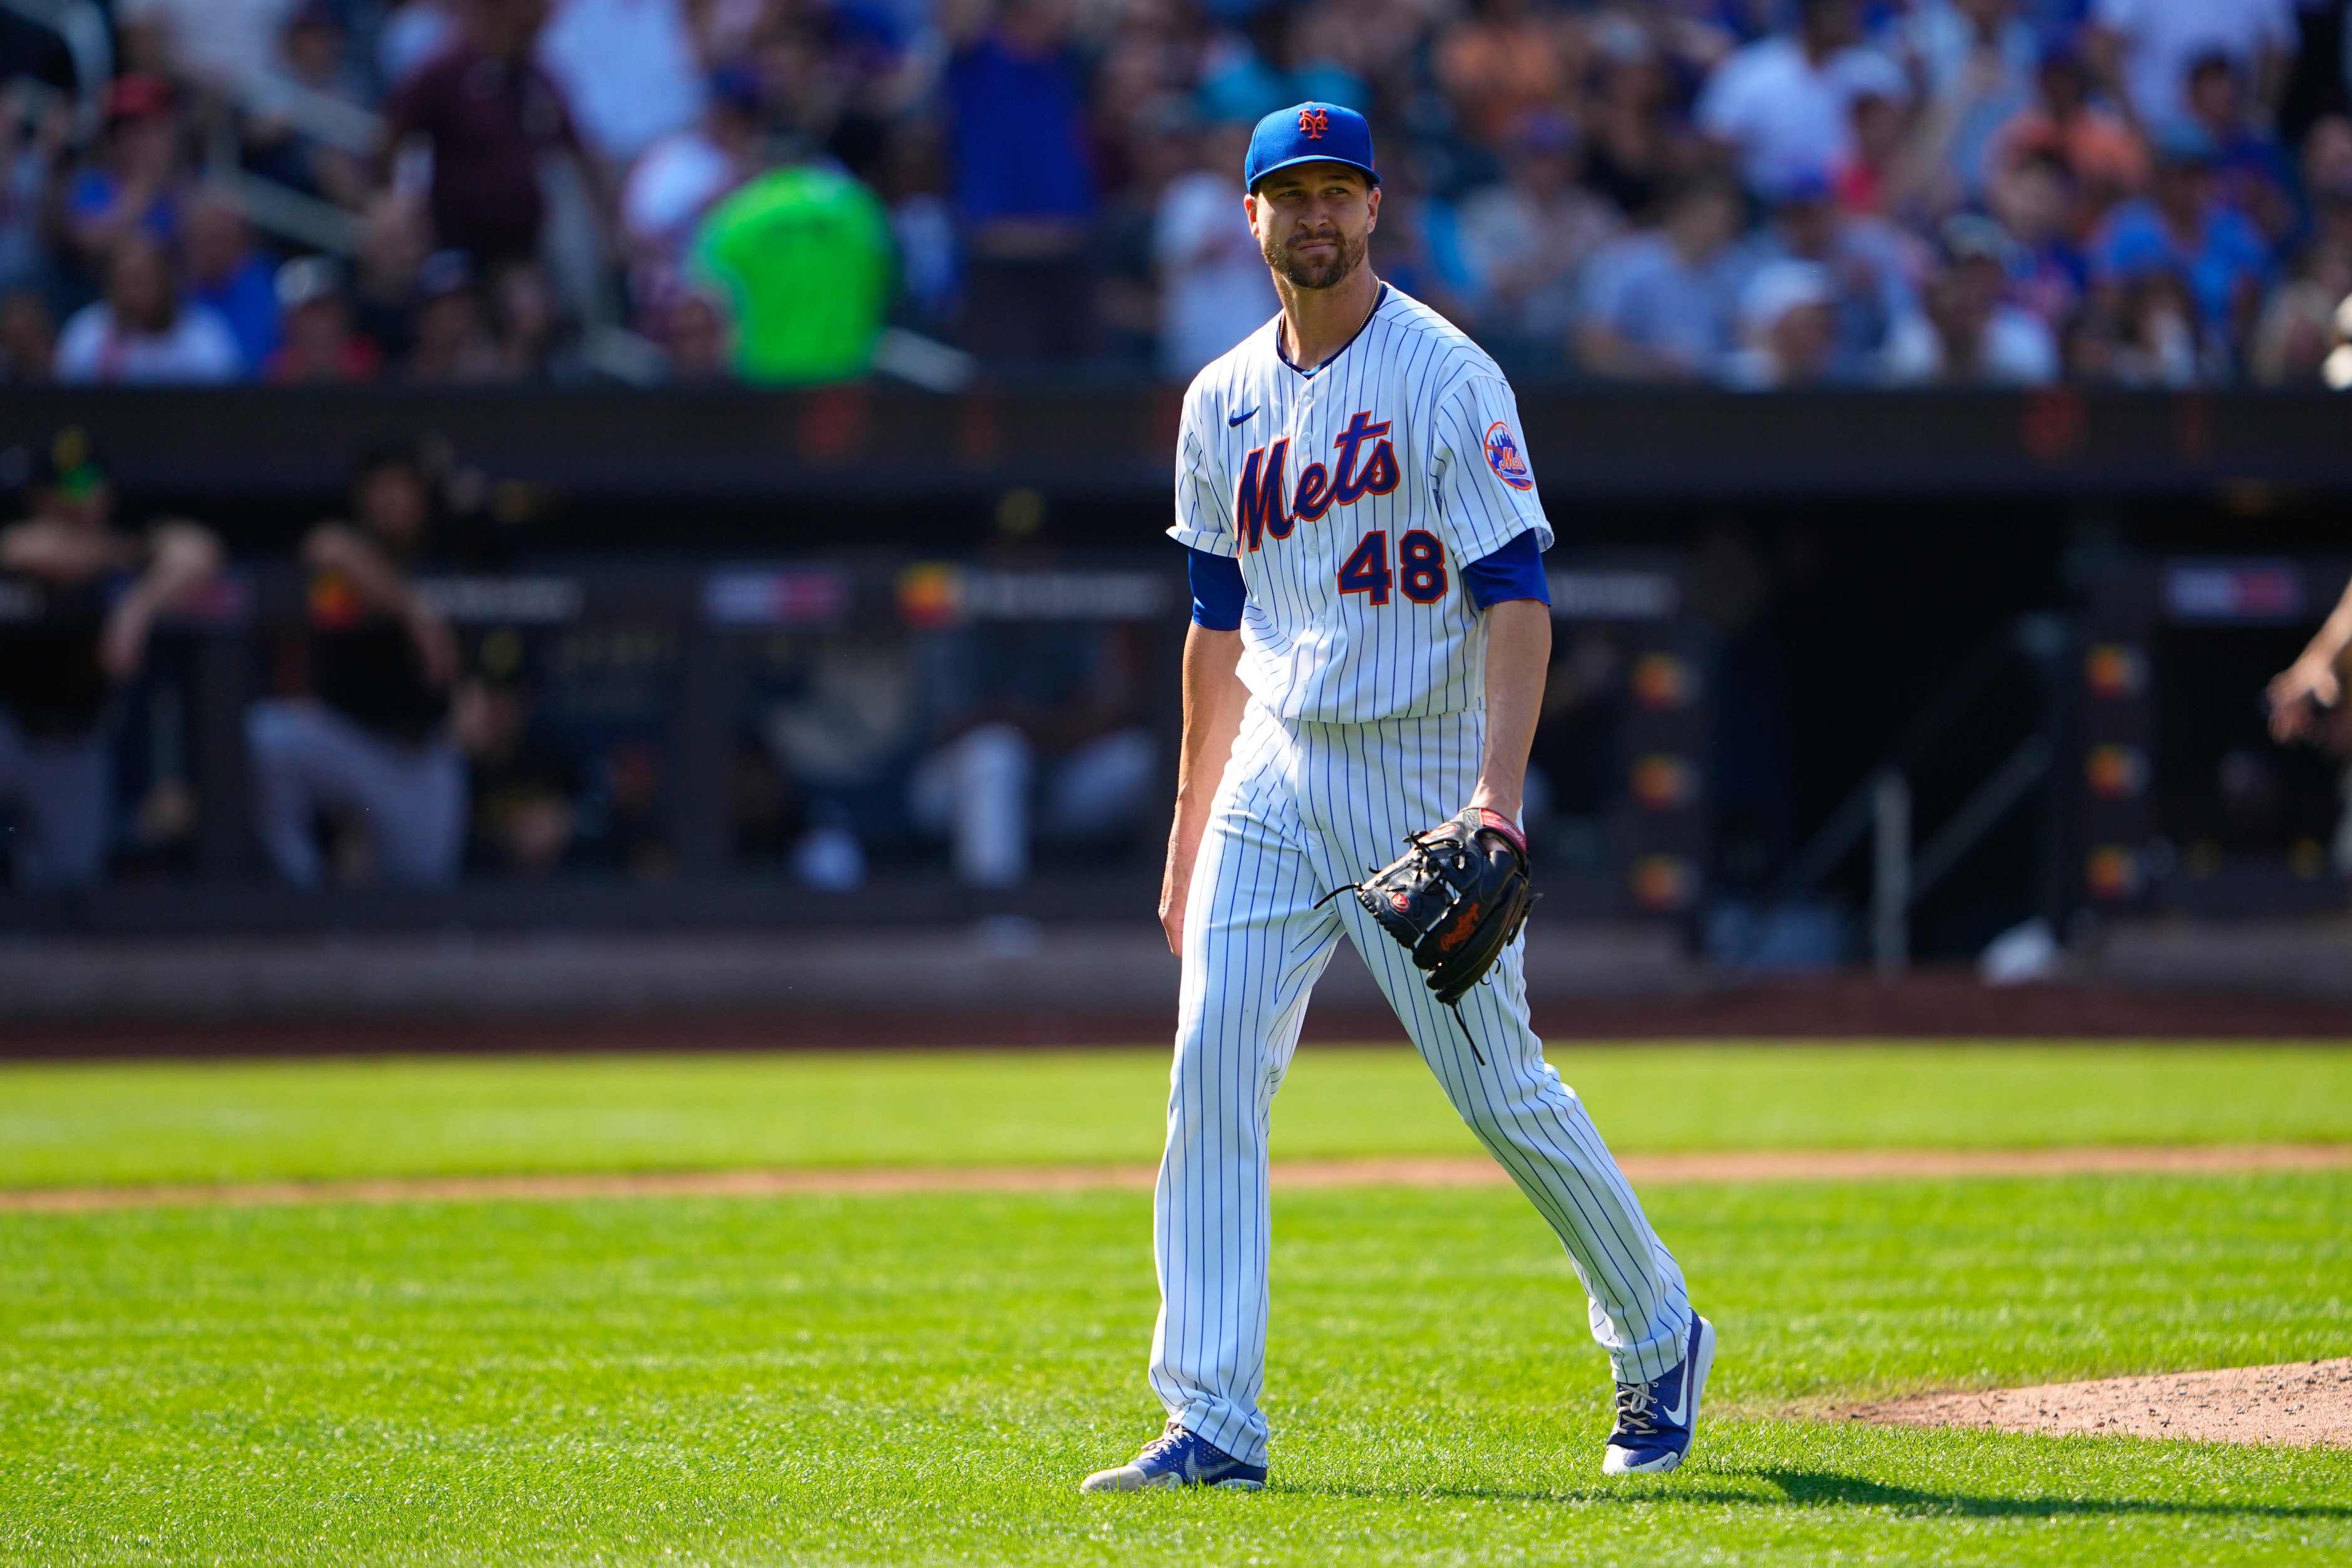 MLB Insider Lists Yankees as Likely Suitor to Sign Jacob deGrom This Offseason